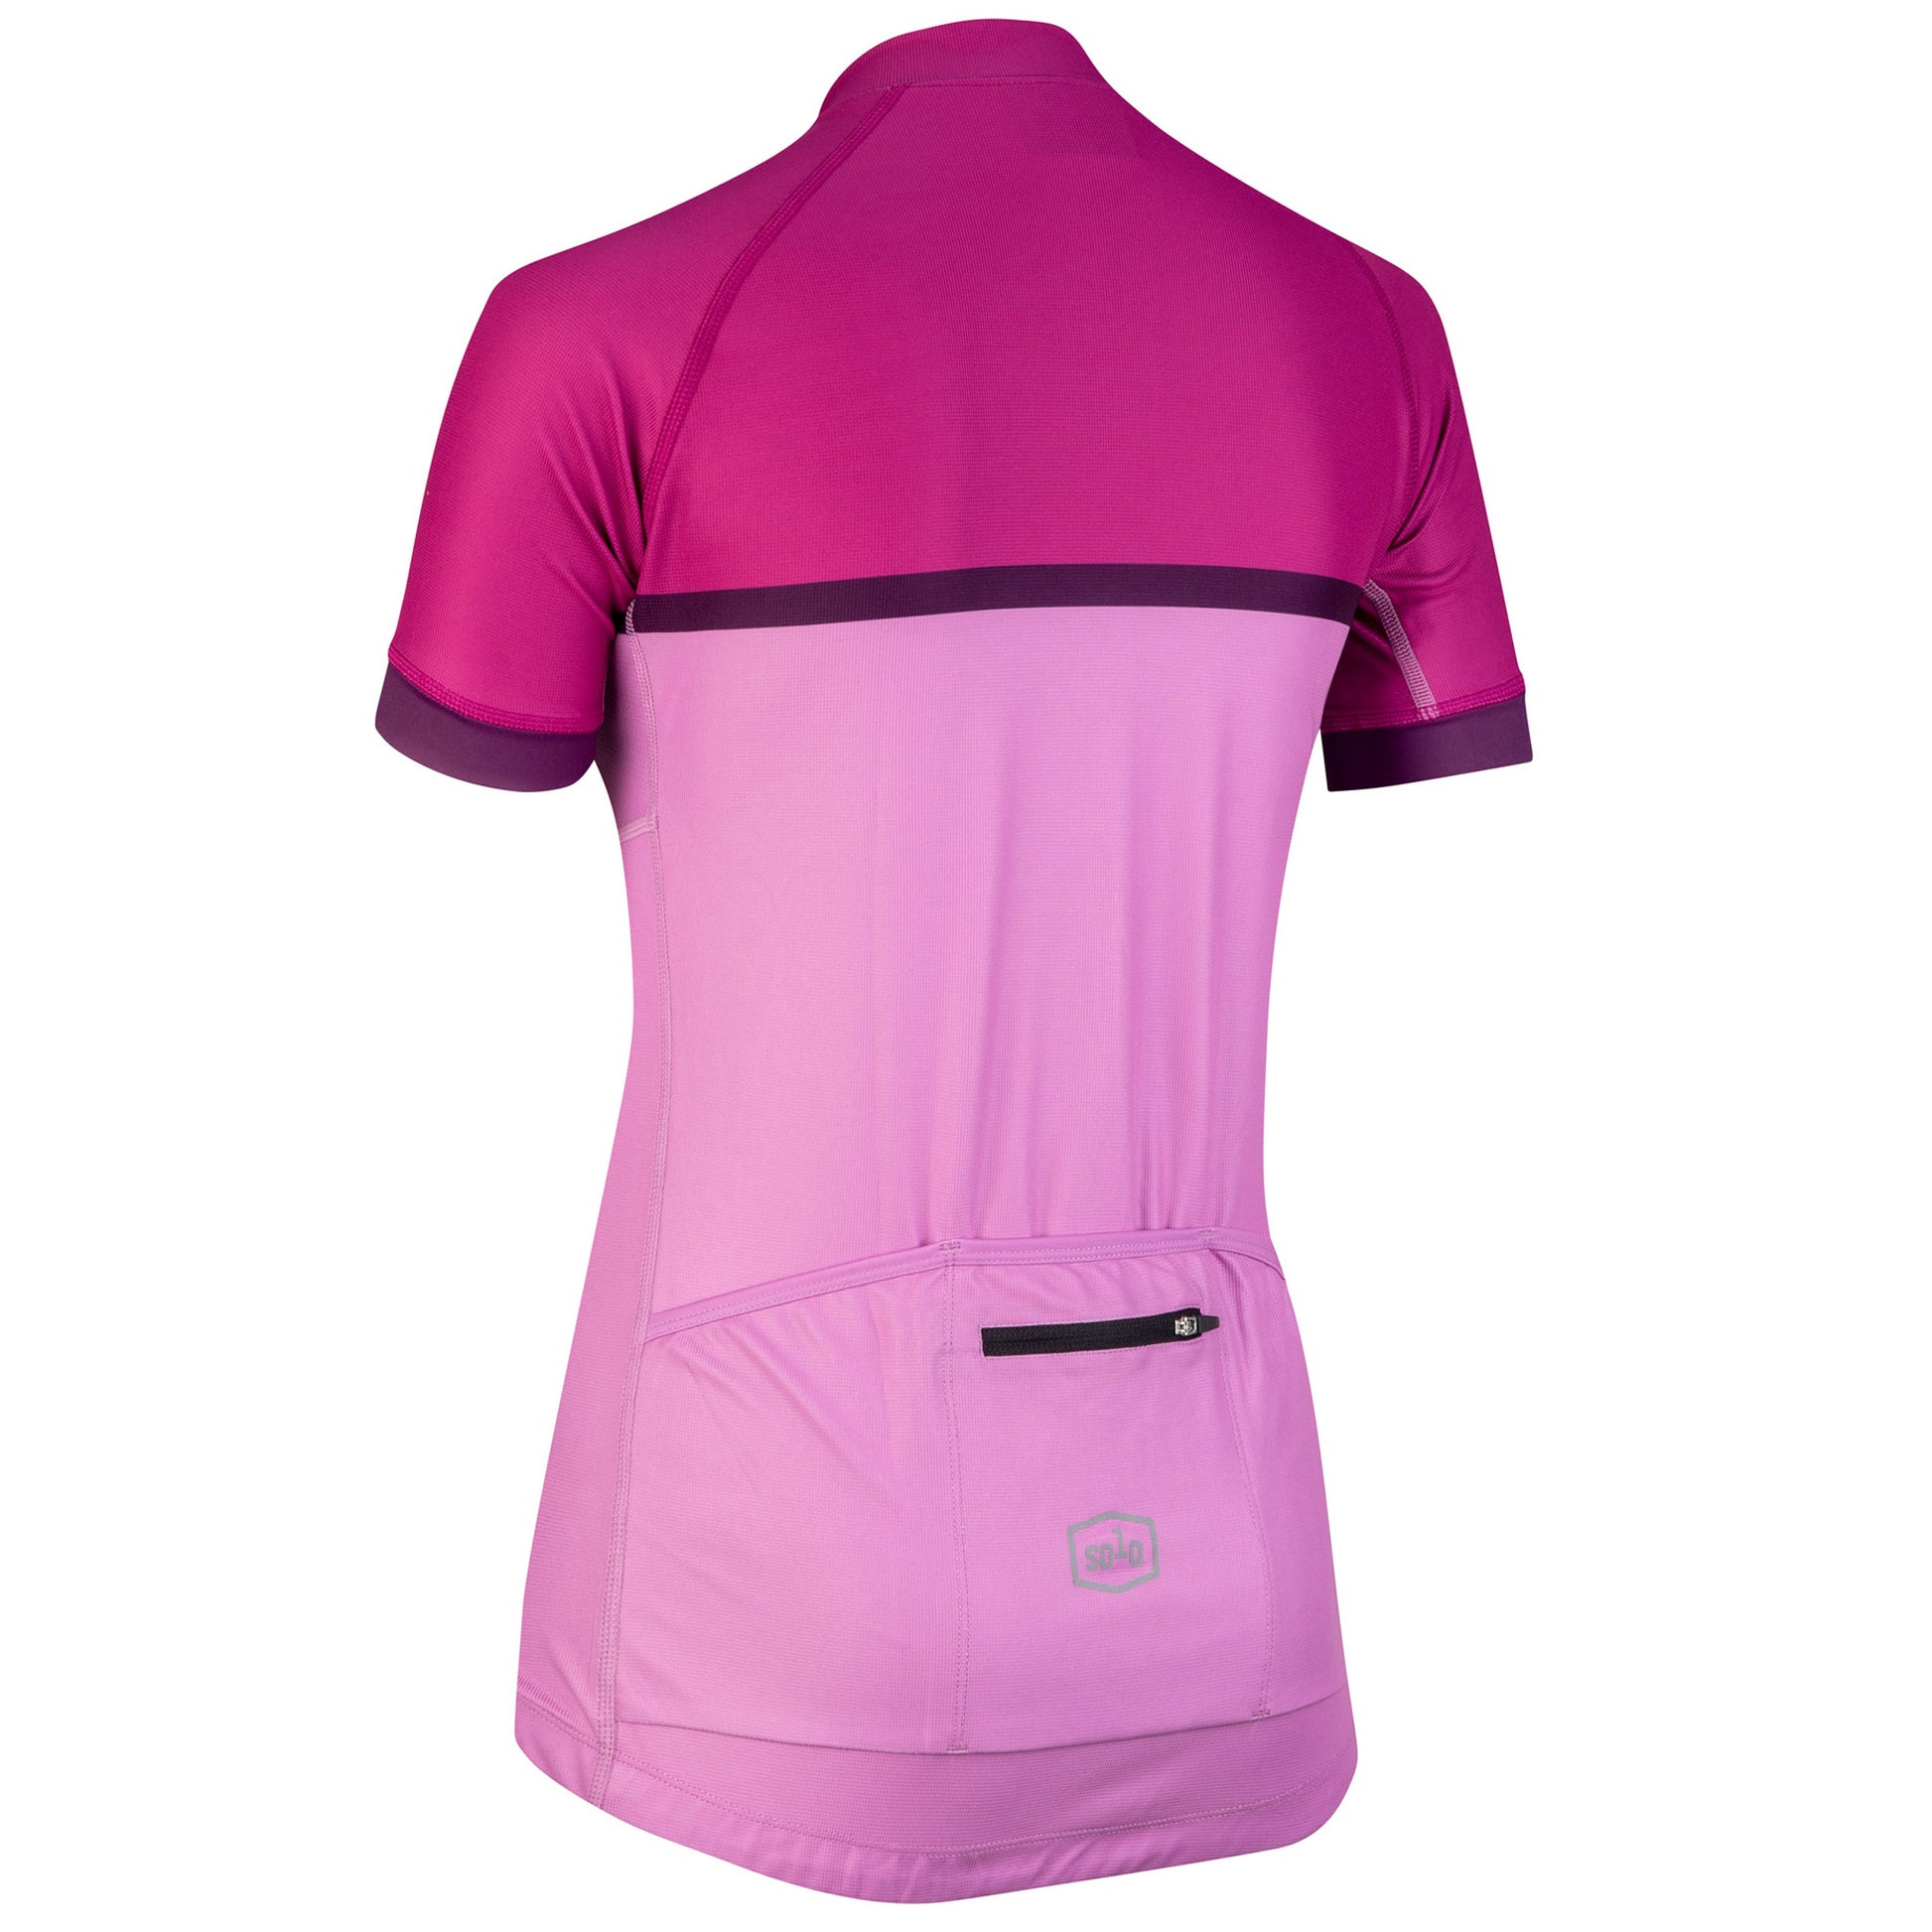 Solo Women's Cadence Jersey, Purple/Pink, buy online at Woolys Wheels with free delivery